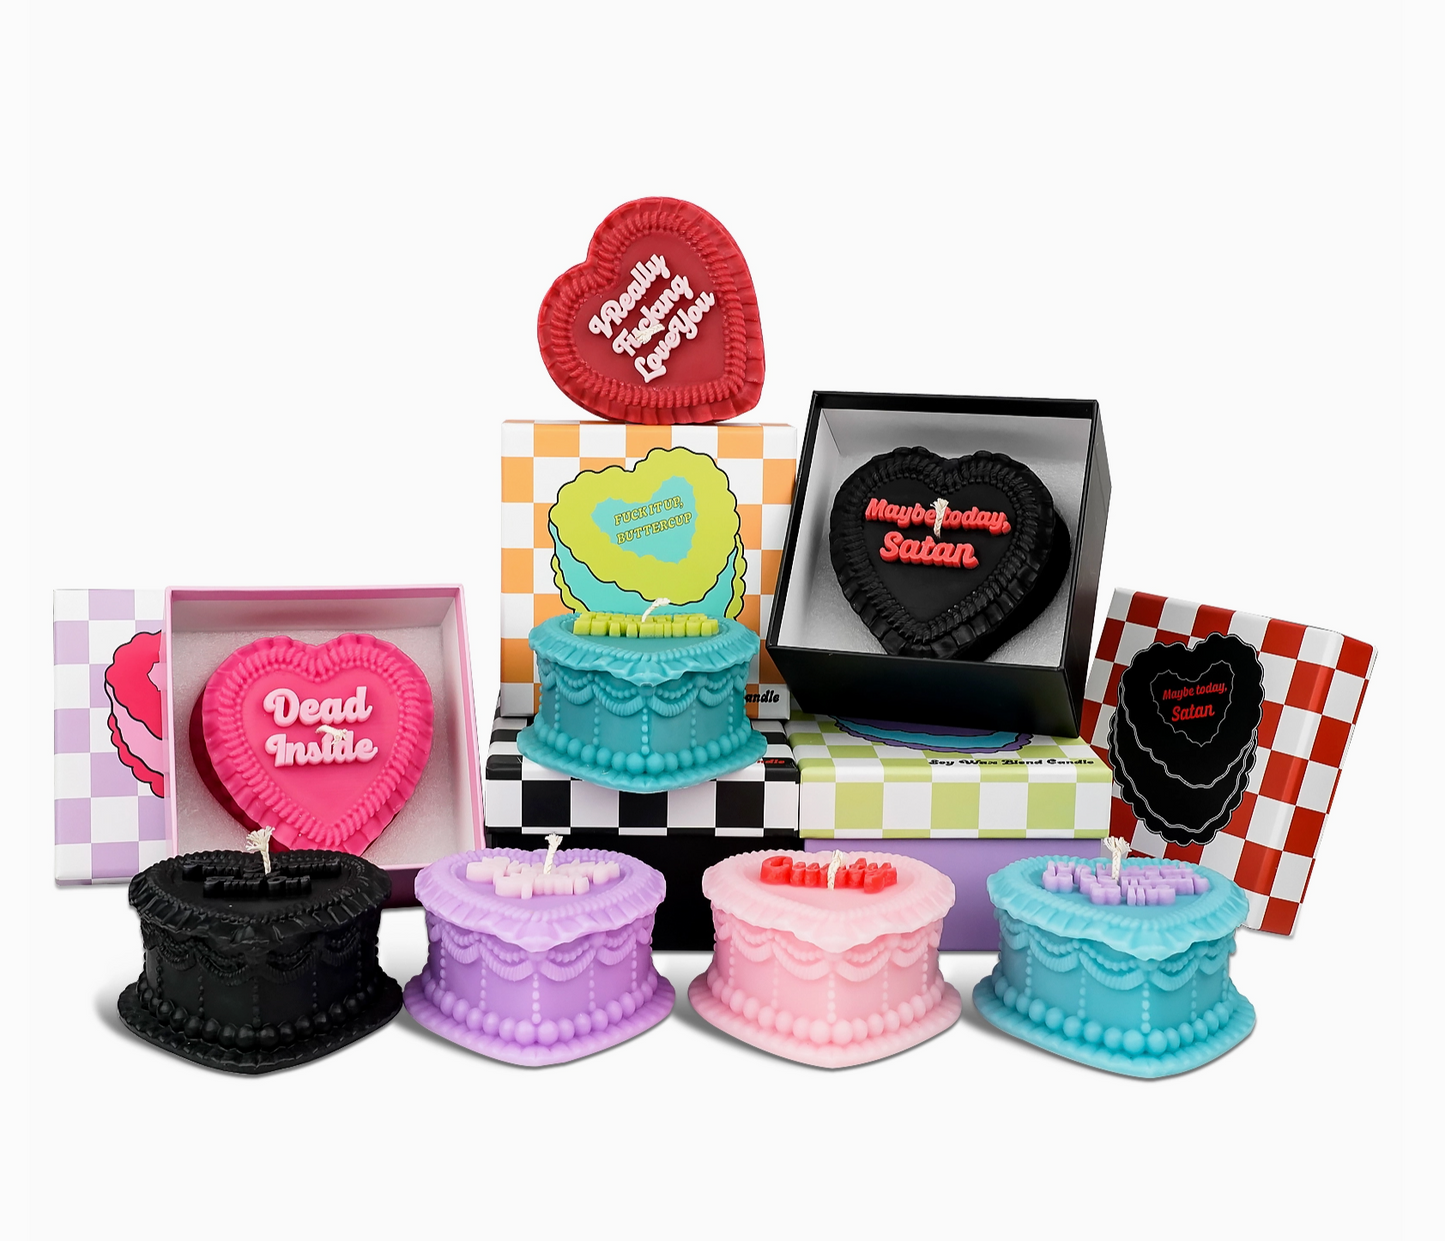 Load image into Gallery viewer, Cunty Vintage Heart-Shaped Cake Soy Candle - 13.5 Ounces
